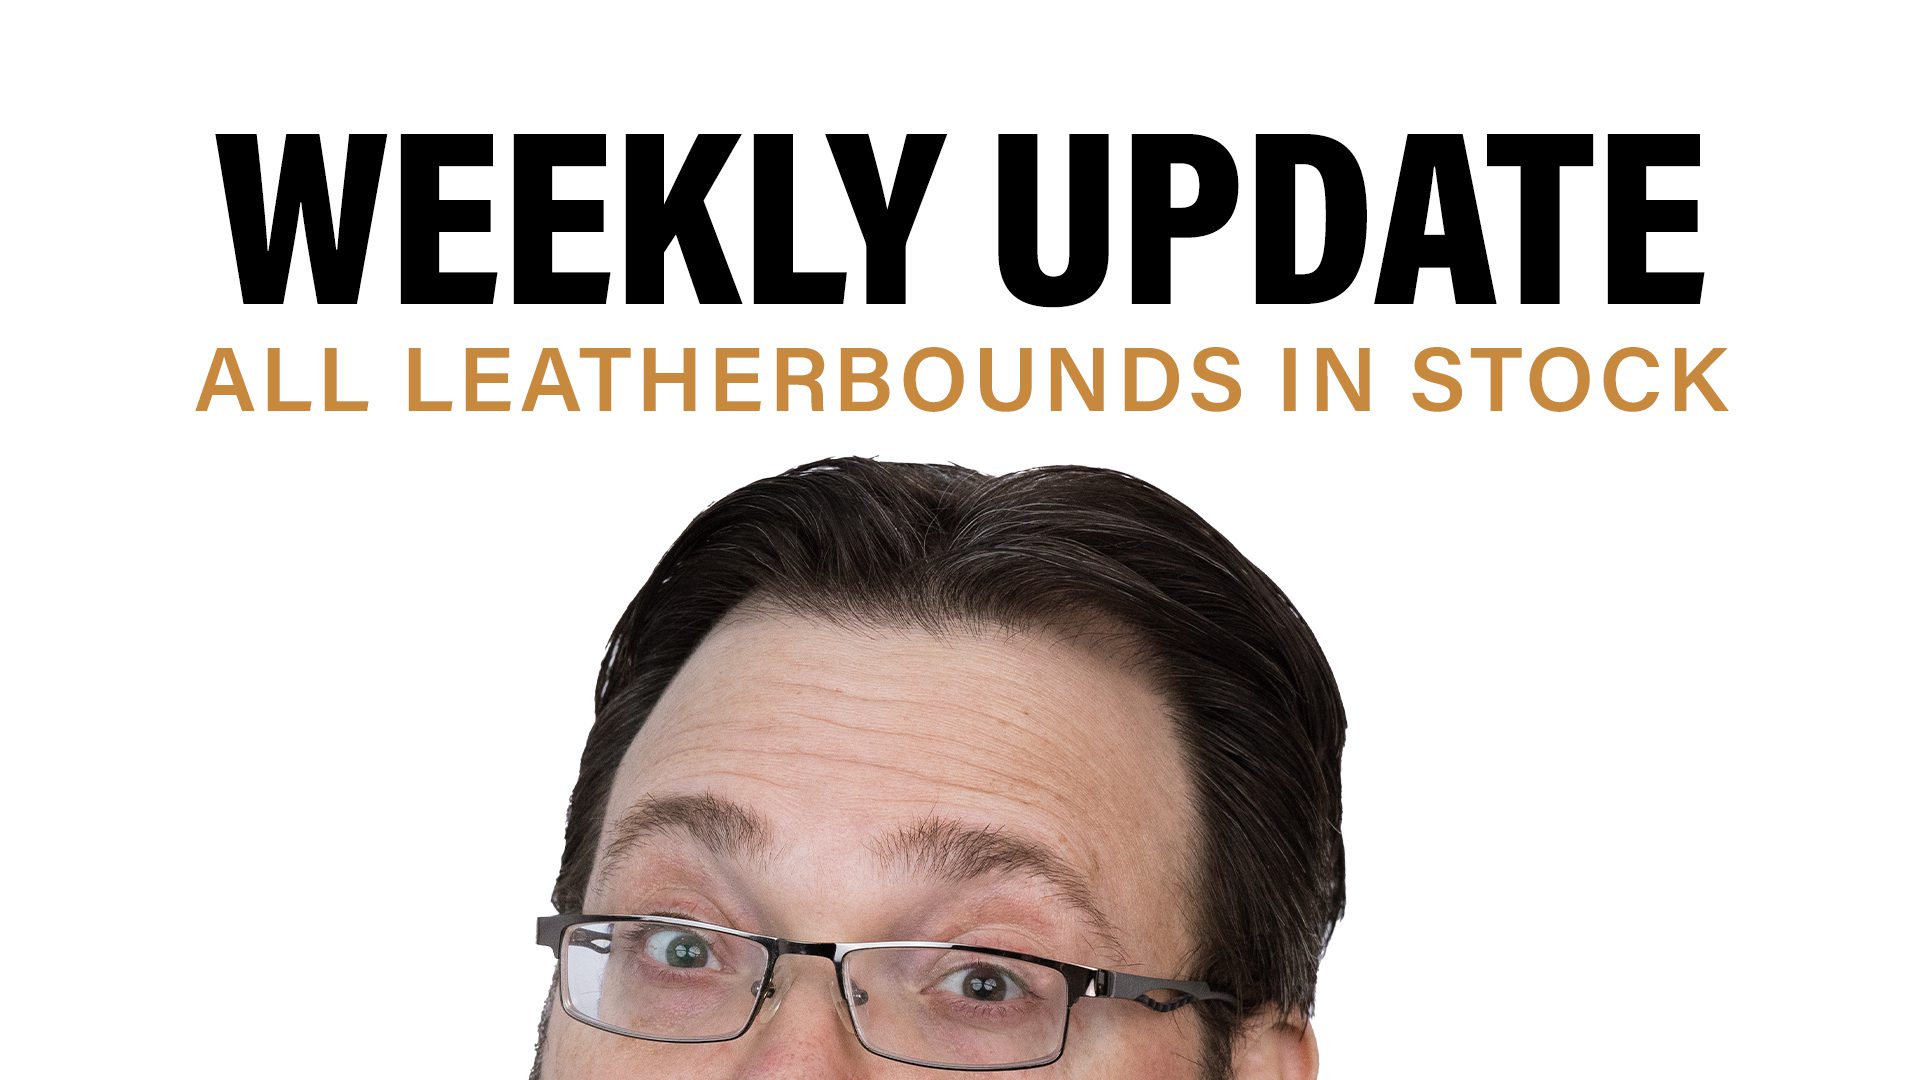 Weekly Update Thumbnail: All Leatherbounds in stock